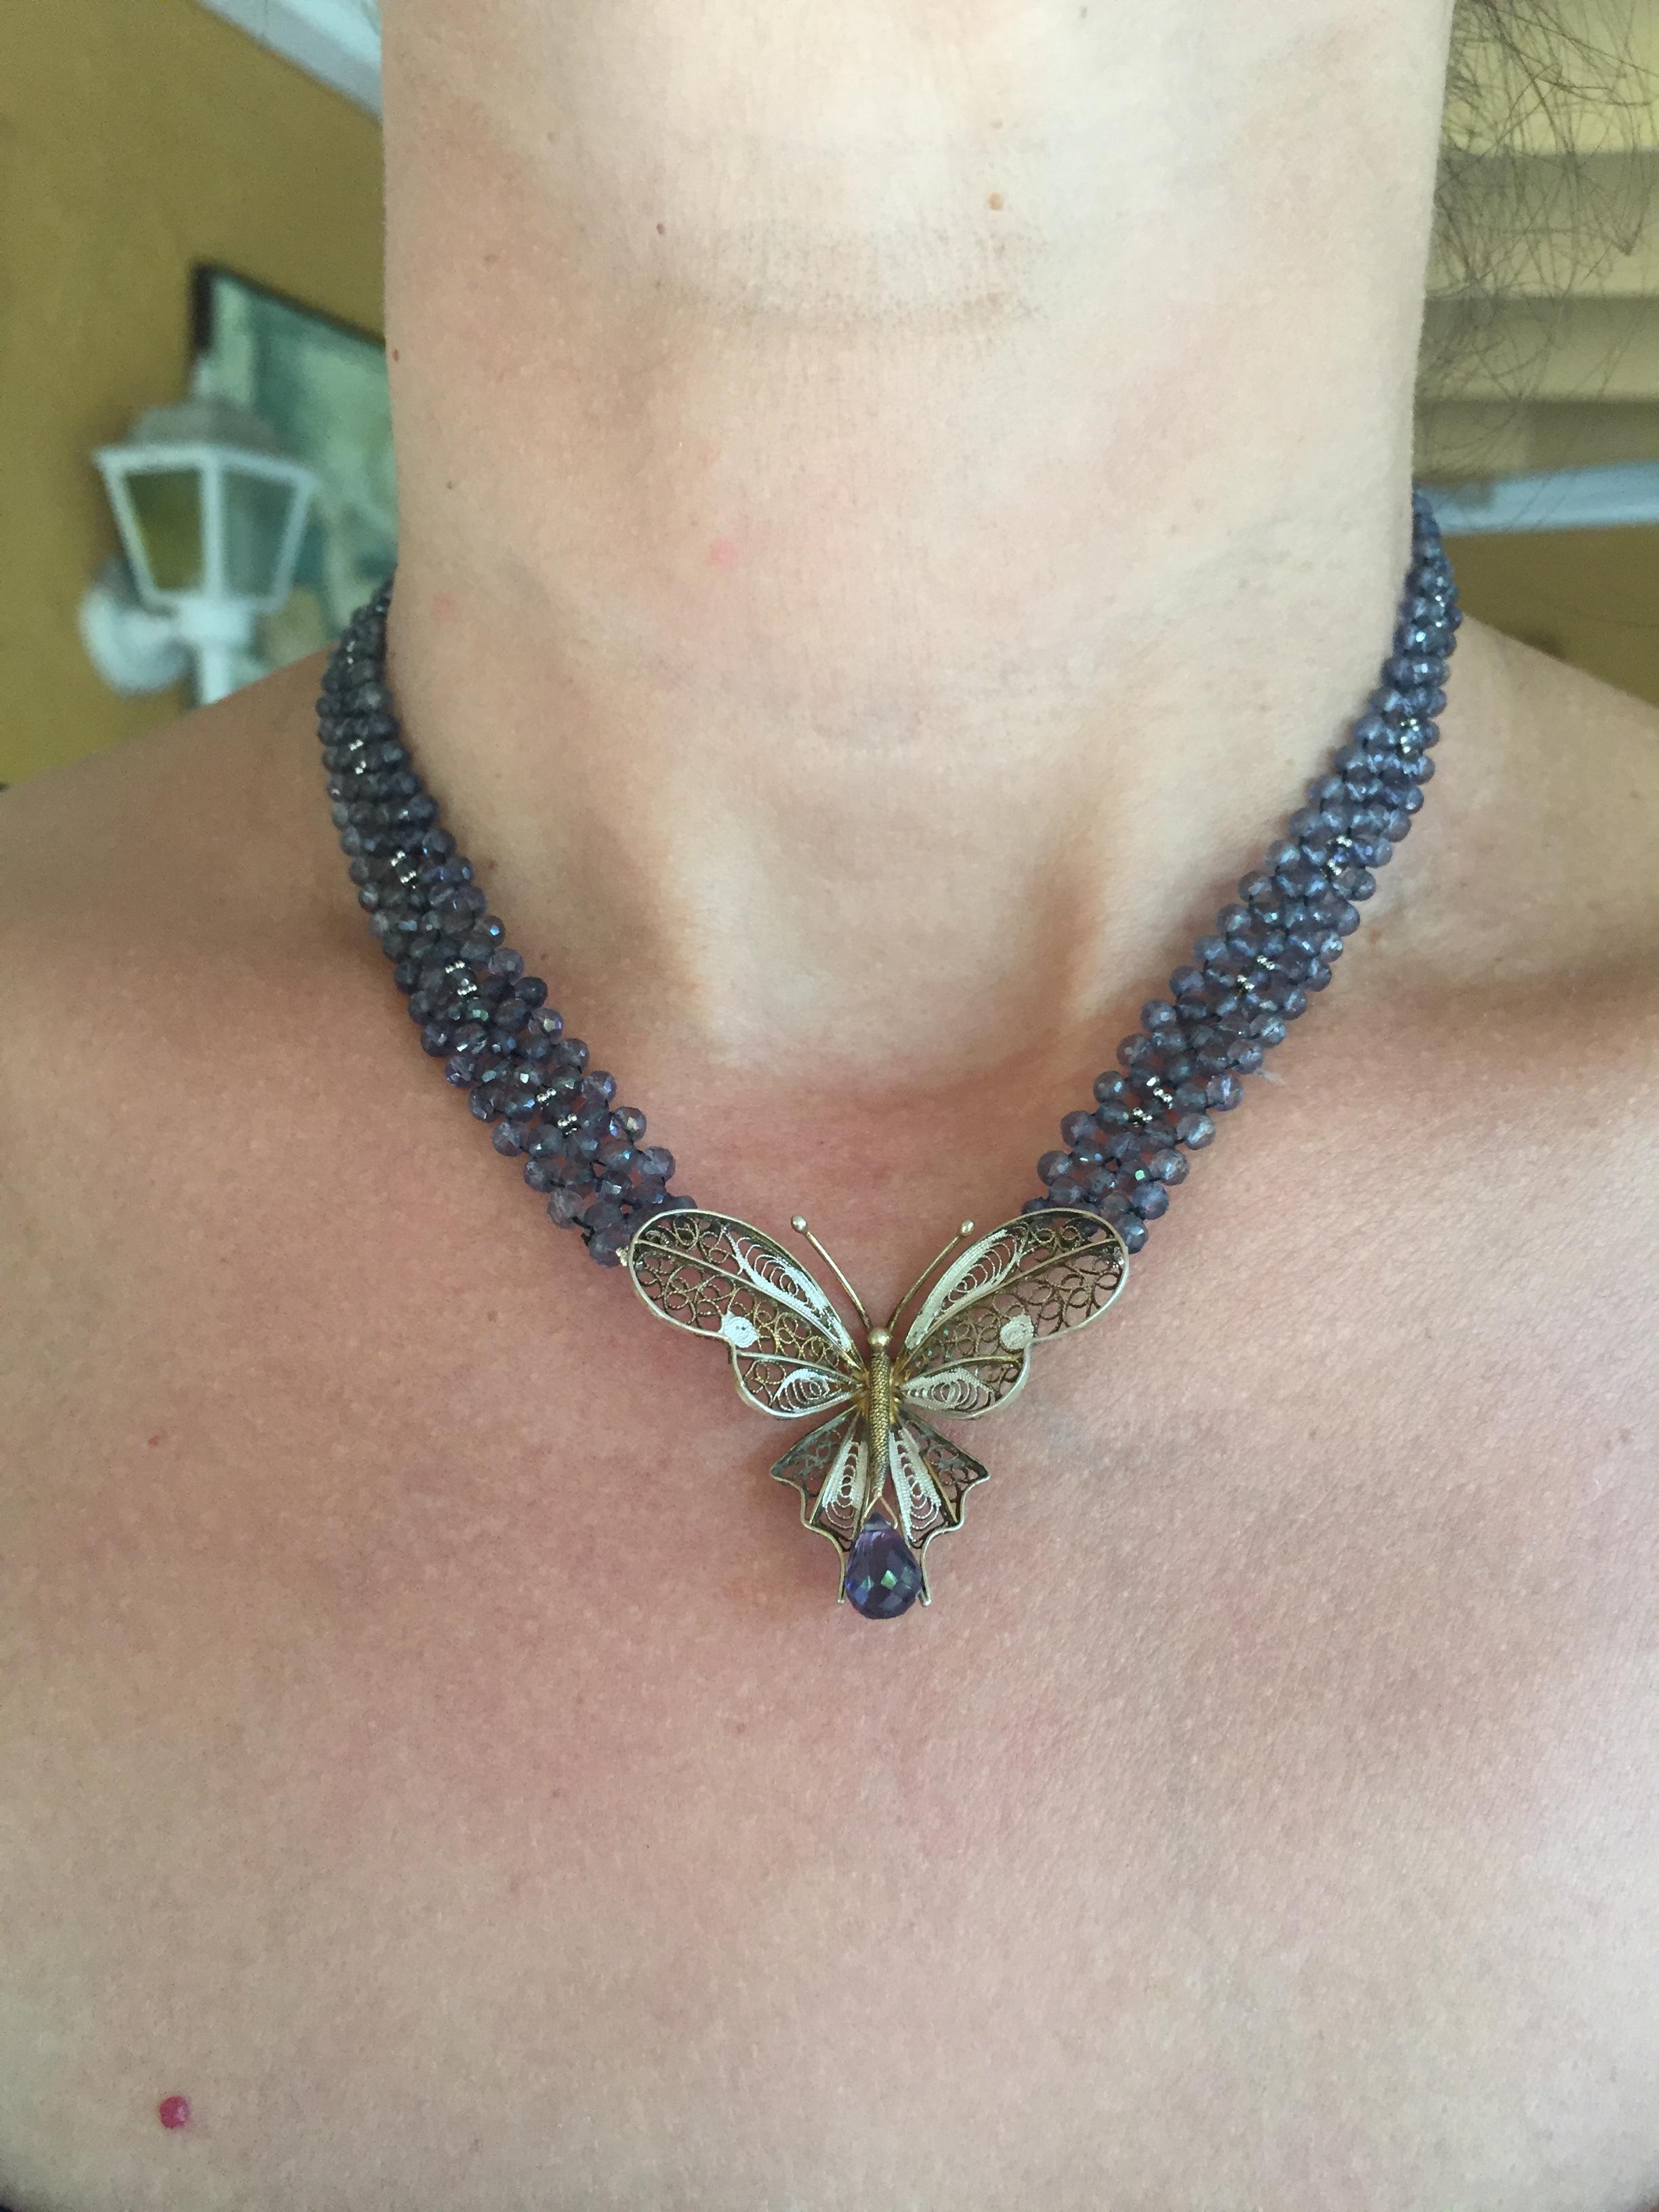 Marina J. Vintage Butterfly on Woven Iolite Beaded Necklace with 14k White Gold 4